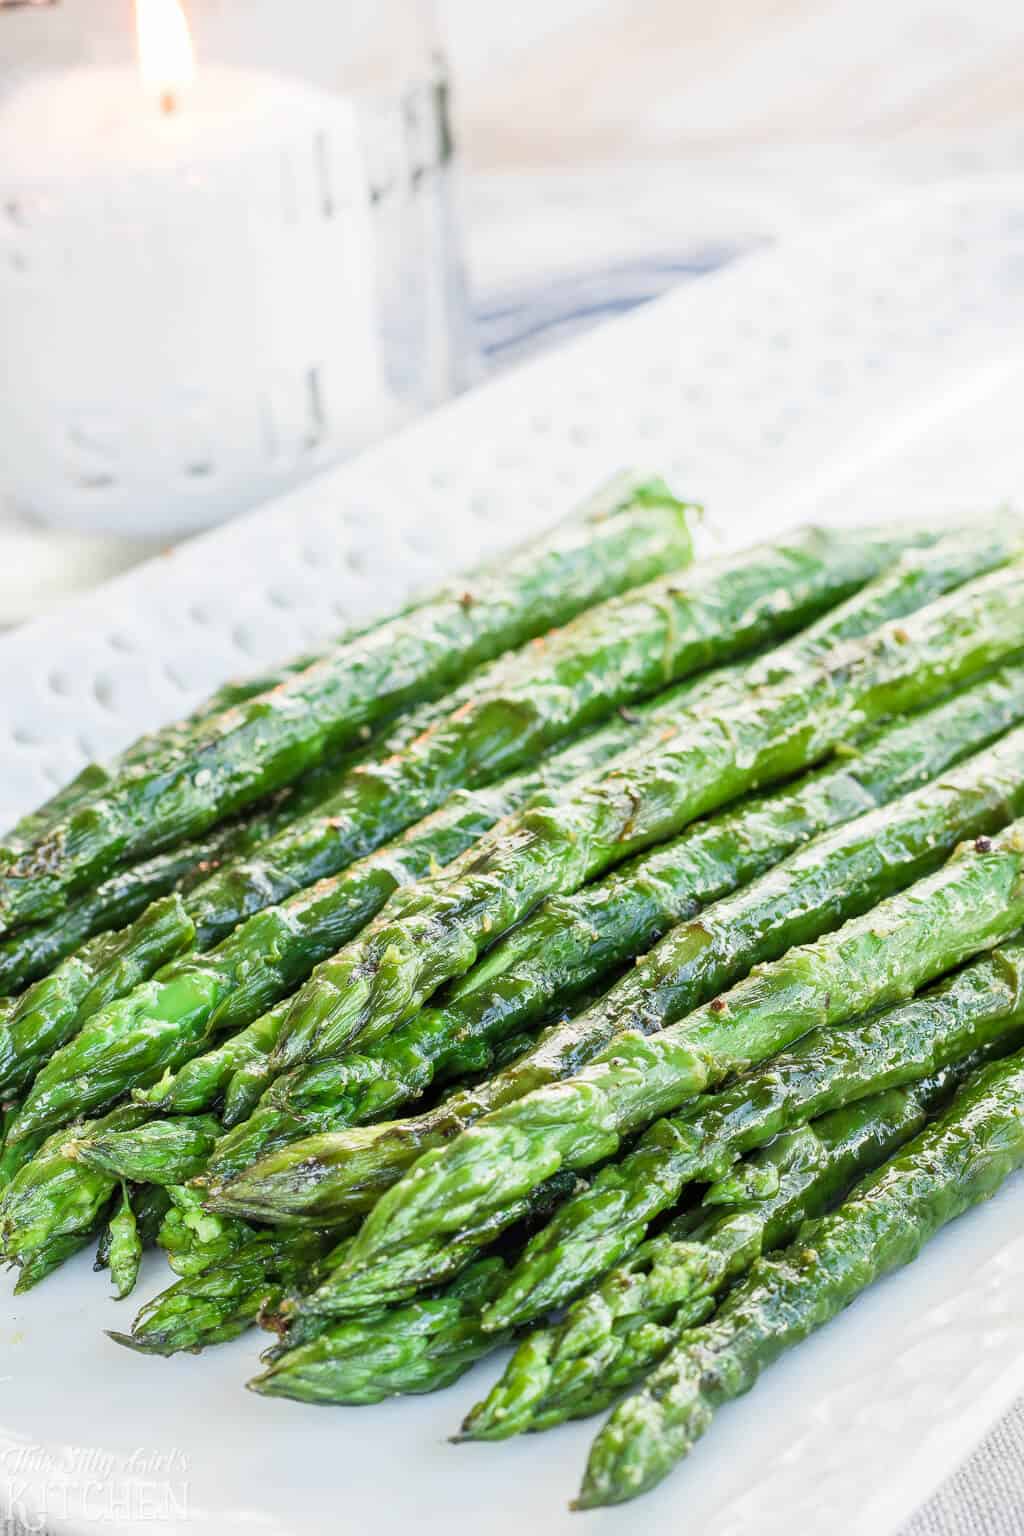 Grilled Asparagus, made with 5 simple ingredients and ready in under 15 minutes! #Recipe from ThisSillyGirlsKitchen.com #asparagus #grilledasparagus